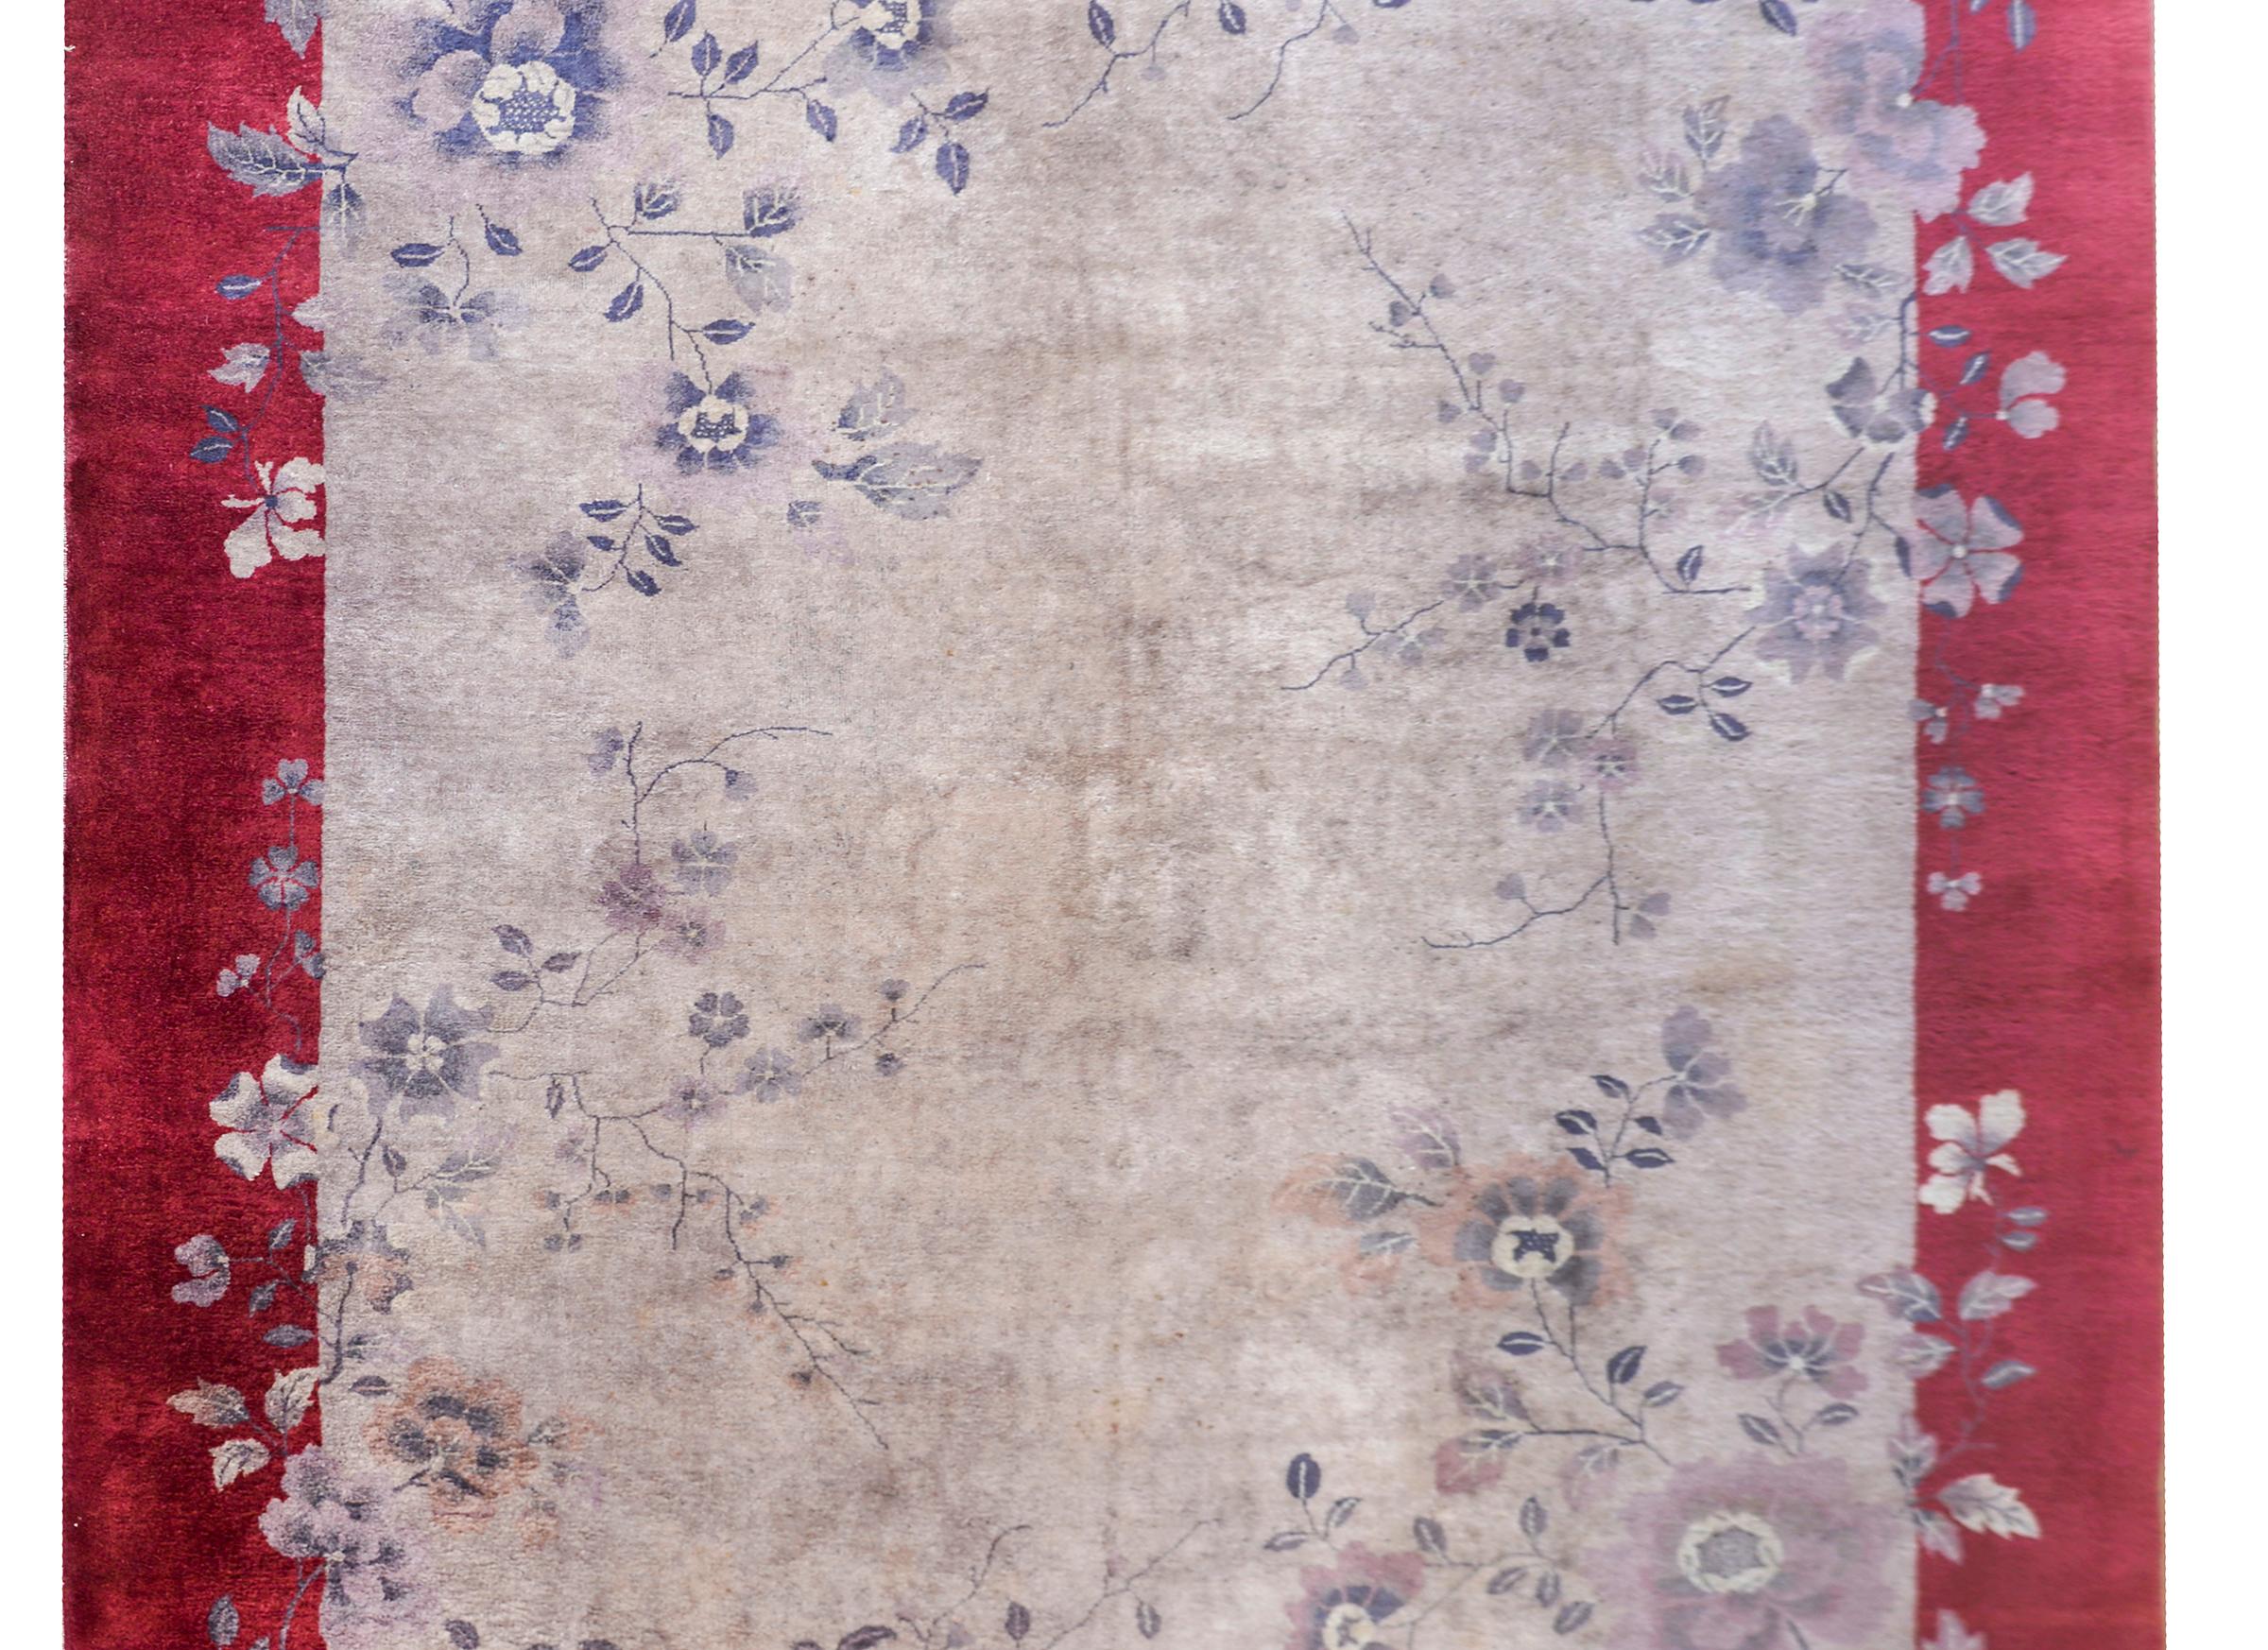 An exceptional early 20th century Chinese Art Deco rug with a unique and most beautiful grisaille pattern of myriad peony and scrolling vine clusters woven in varying shades of grays, and set against a gray field, and all surrounded by a rich